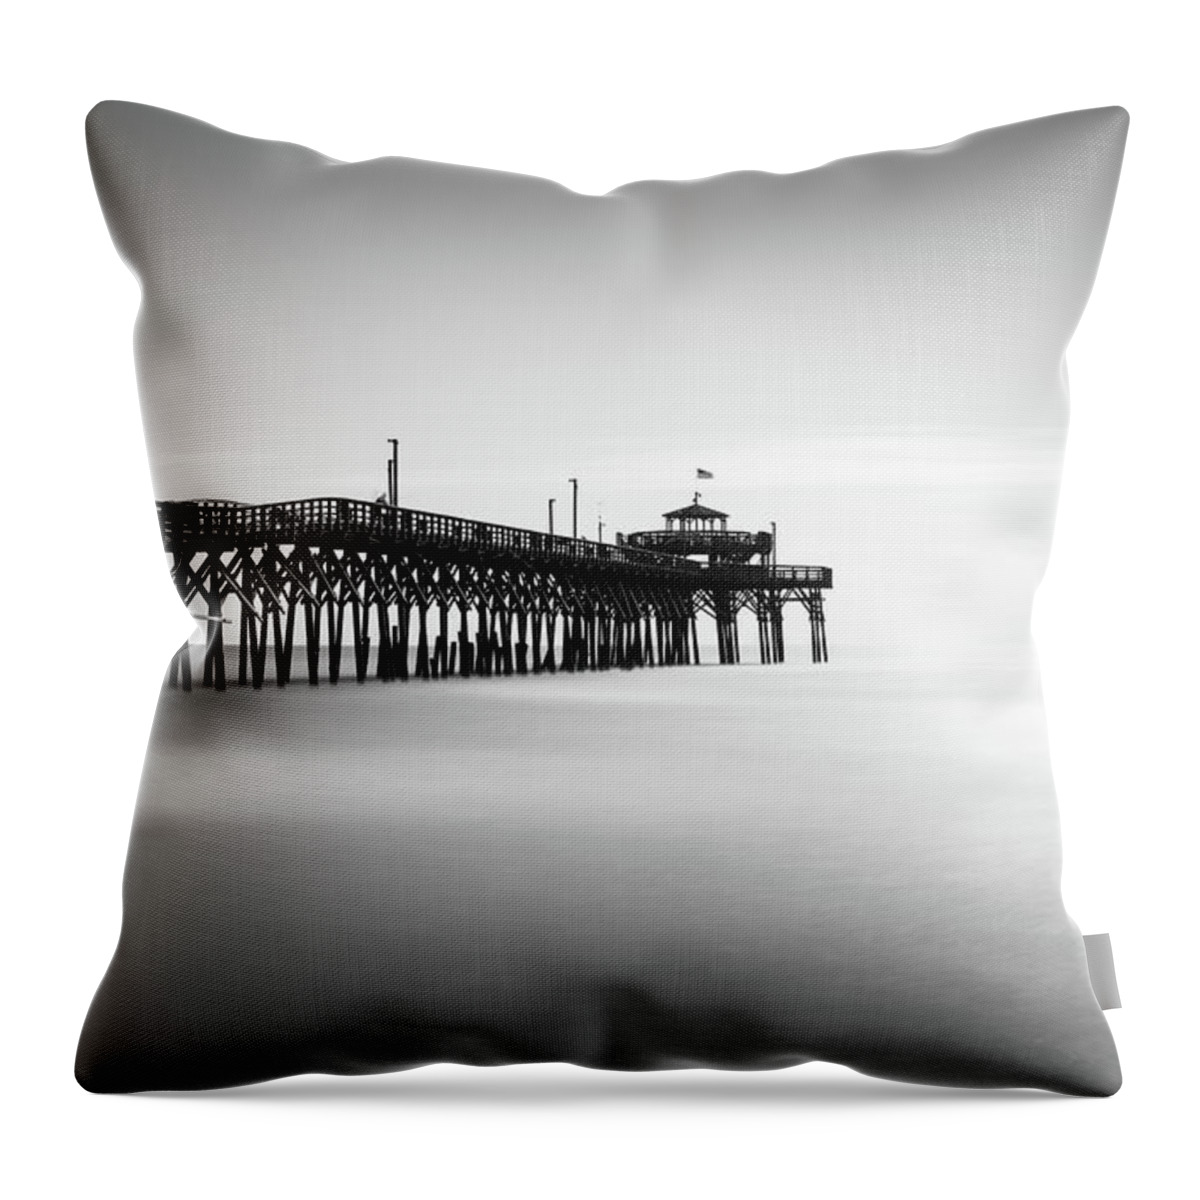 Cherry Grove Throw Pillow featuring the photograph Cherry Grove Fishing Pier by Ivo Kerssemakers